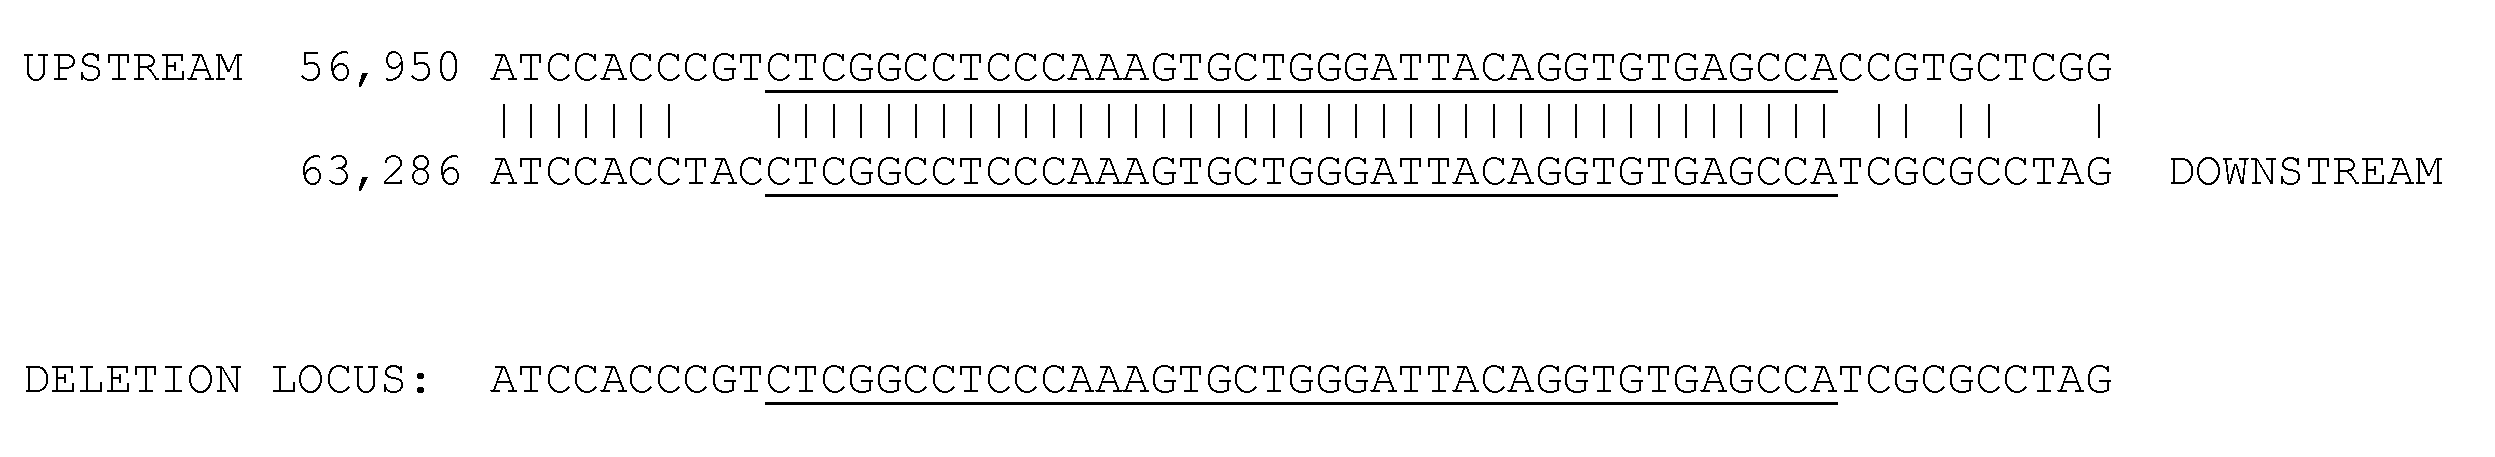 Large deletions in human brca1 gene and use thereof